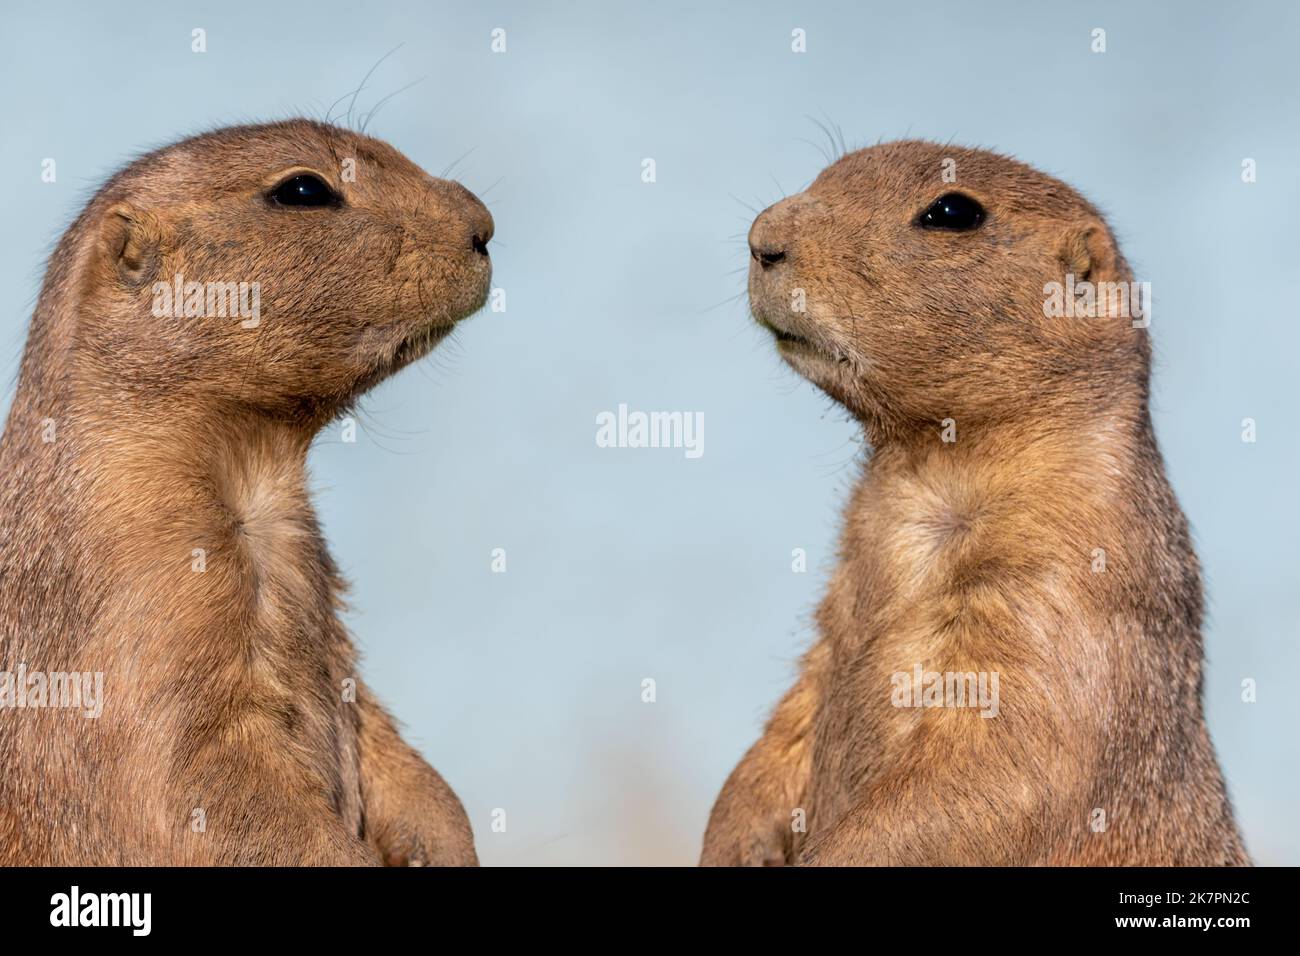 Prairie Dog, Cynomys, closeup standing against soft blue background Stock Photo